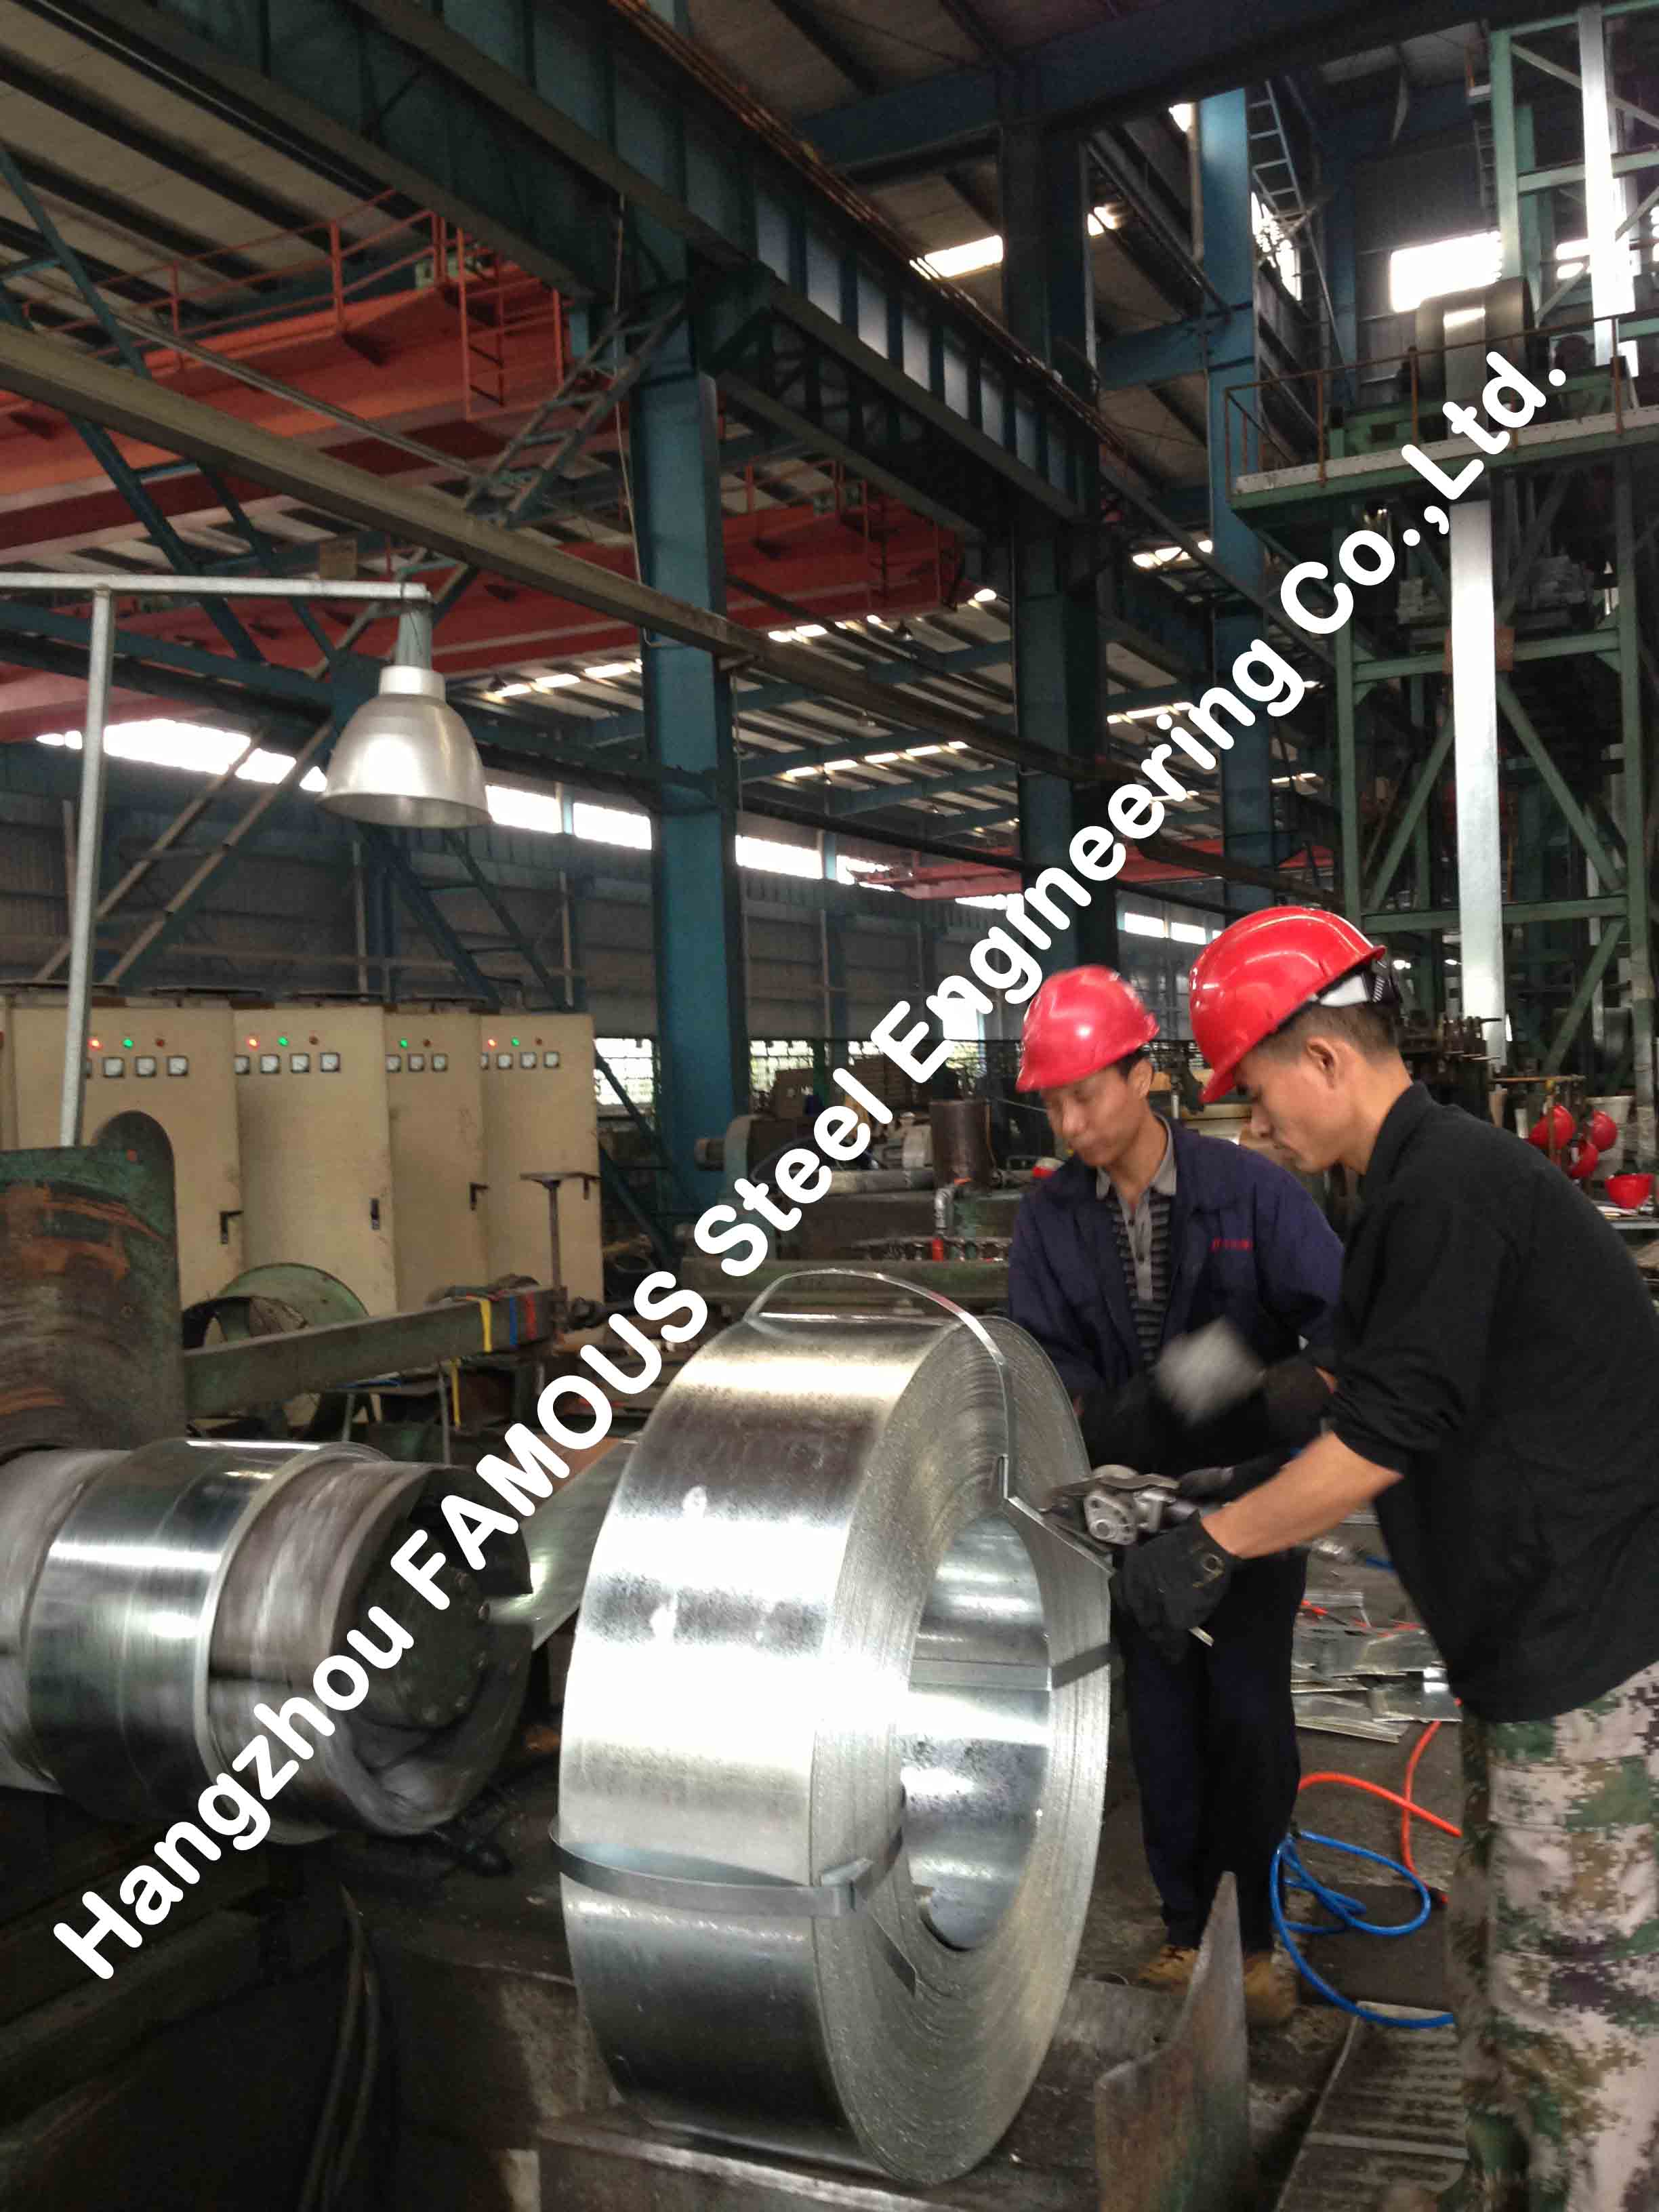 Hot Dipped Cold Rolled Galvanized Steel Coil For Light Industry